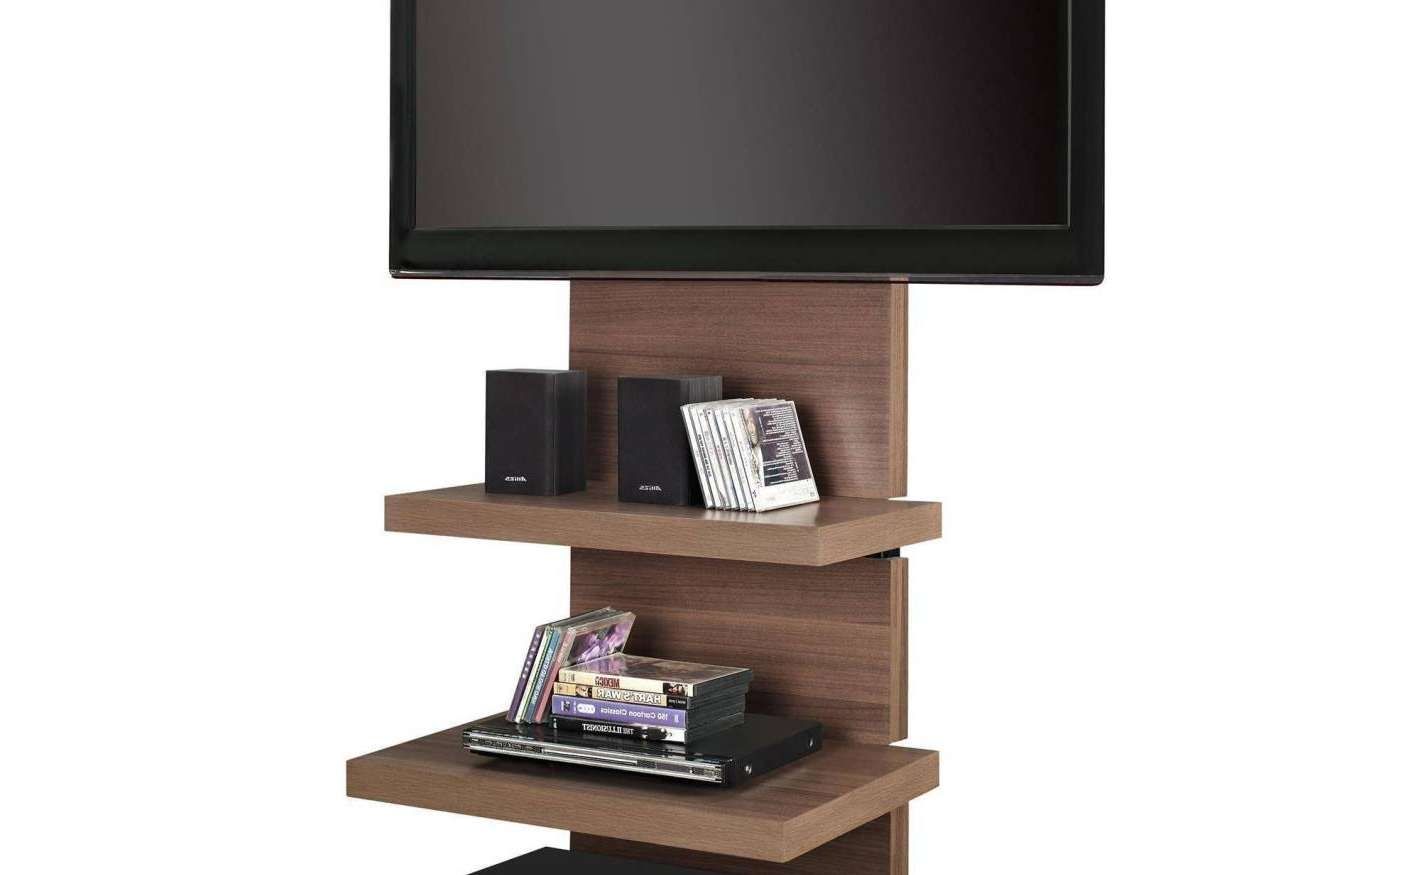 Tv : Engaging 65 Inch Tv Stands With Integrated Mount Gripping 65 Pertaining To 65 Inch Tv Stands With Integrated Mount (Gallery 8 of 15)